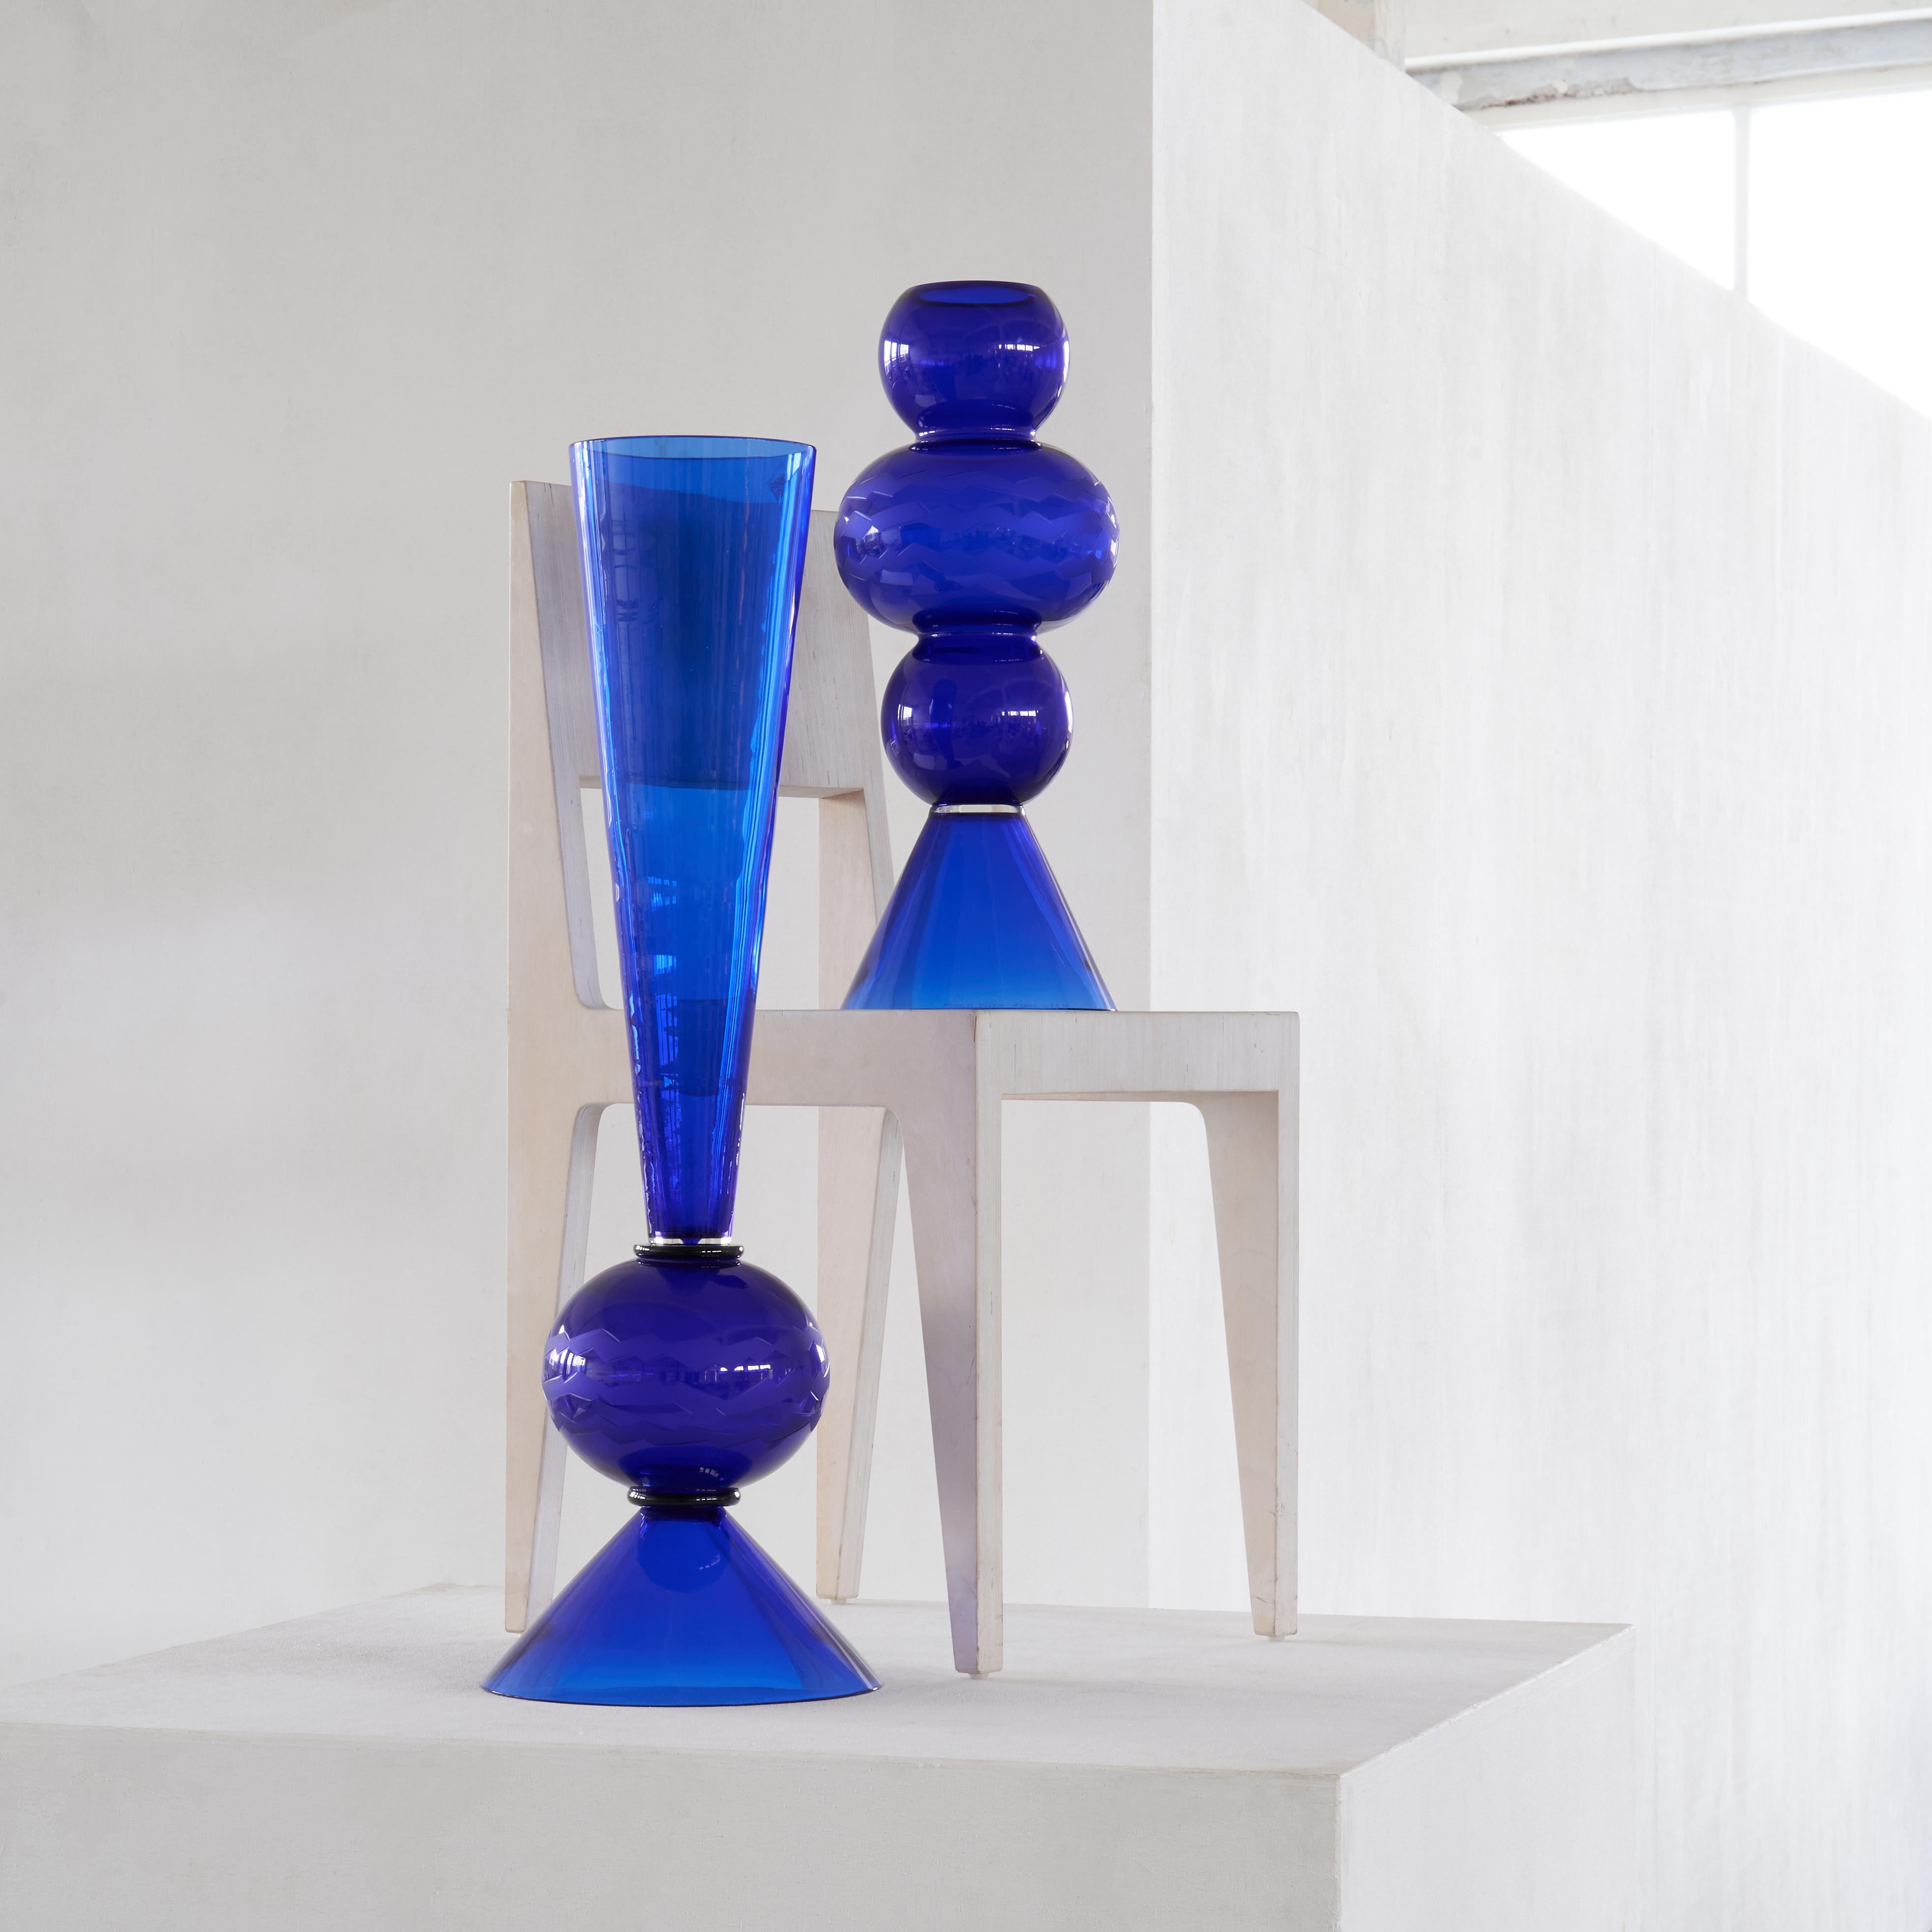 Extraordinary and very large (54,5 & 86 cm in height) glass objects by famous designer and Memphis Group founding member Matteo Thun (1952 – Italy). Rinascimento Collection for Tiffany & Co, made by Murano glass house Barovier&Toso in Venezia in